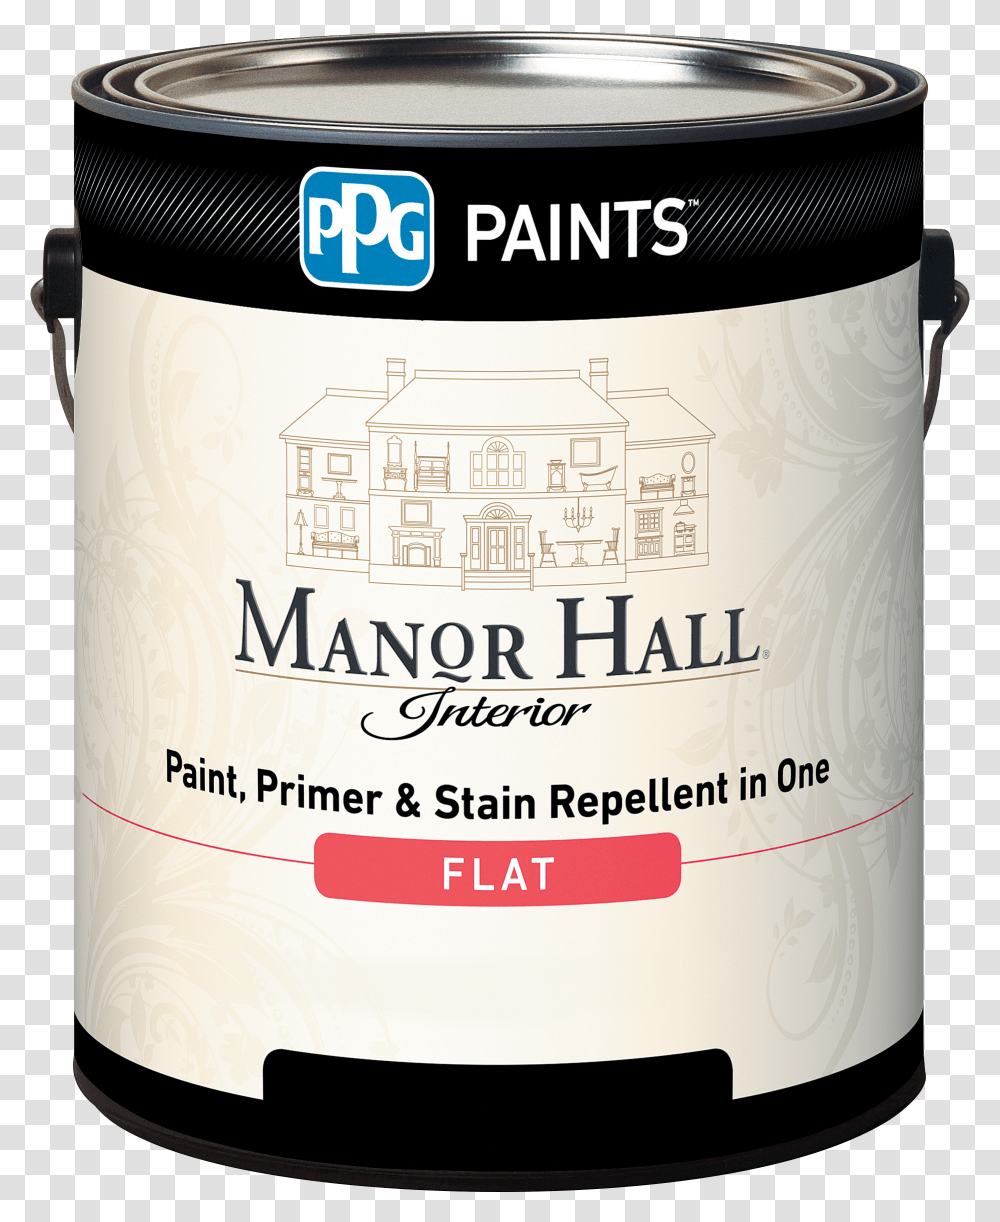 Manor Hall Paint Ppg Transparent Png